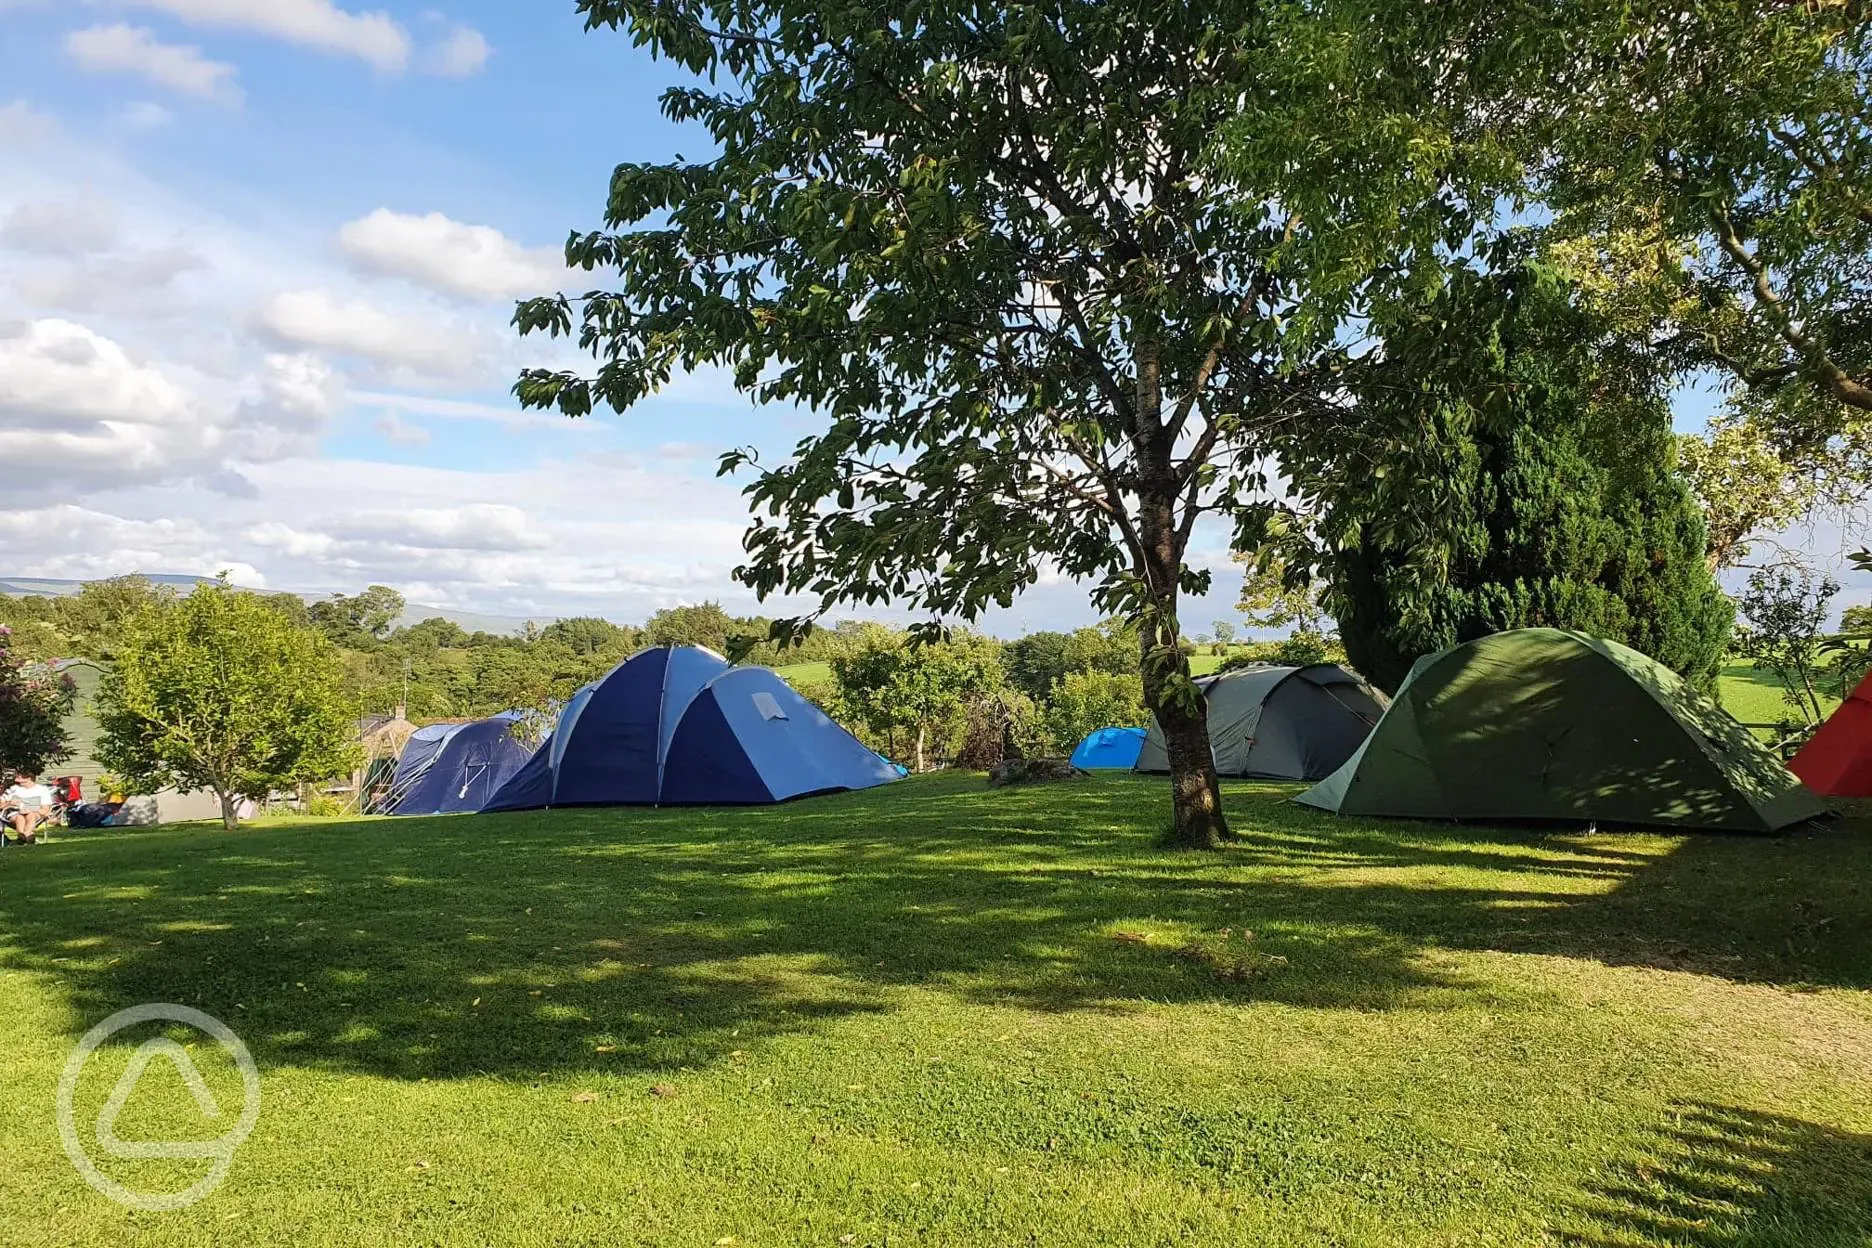 Camping in the orchard 